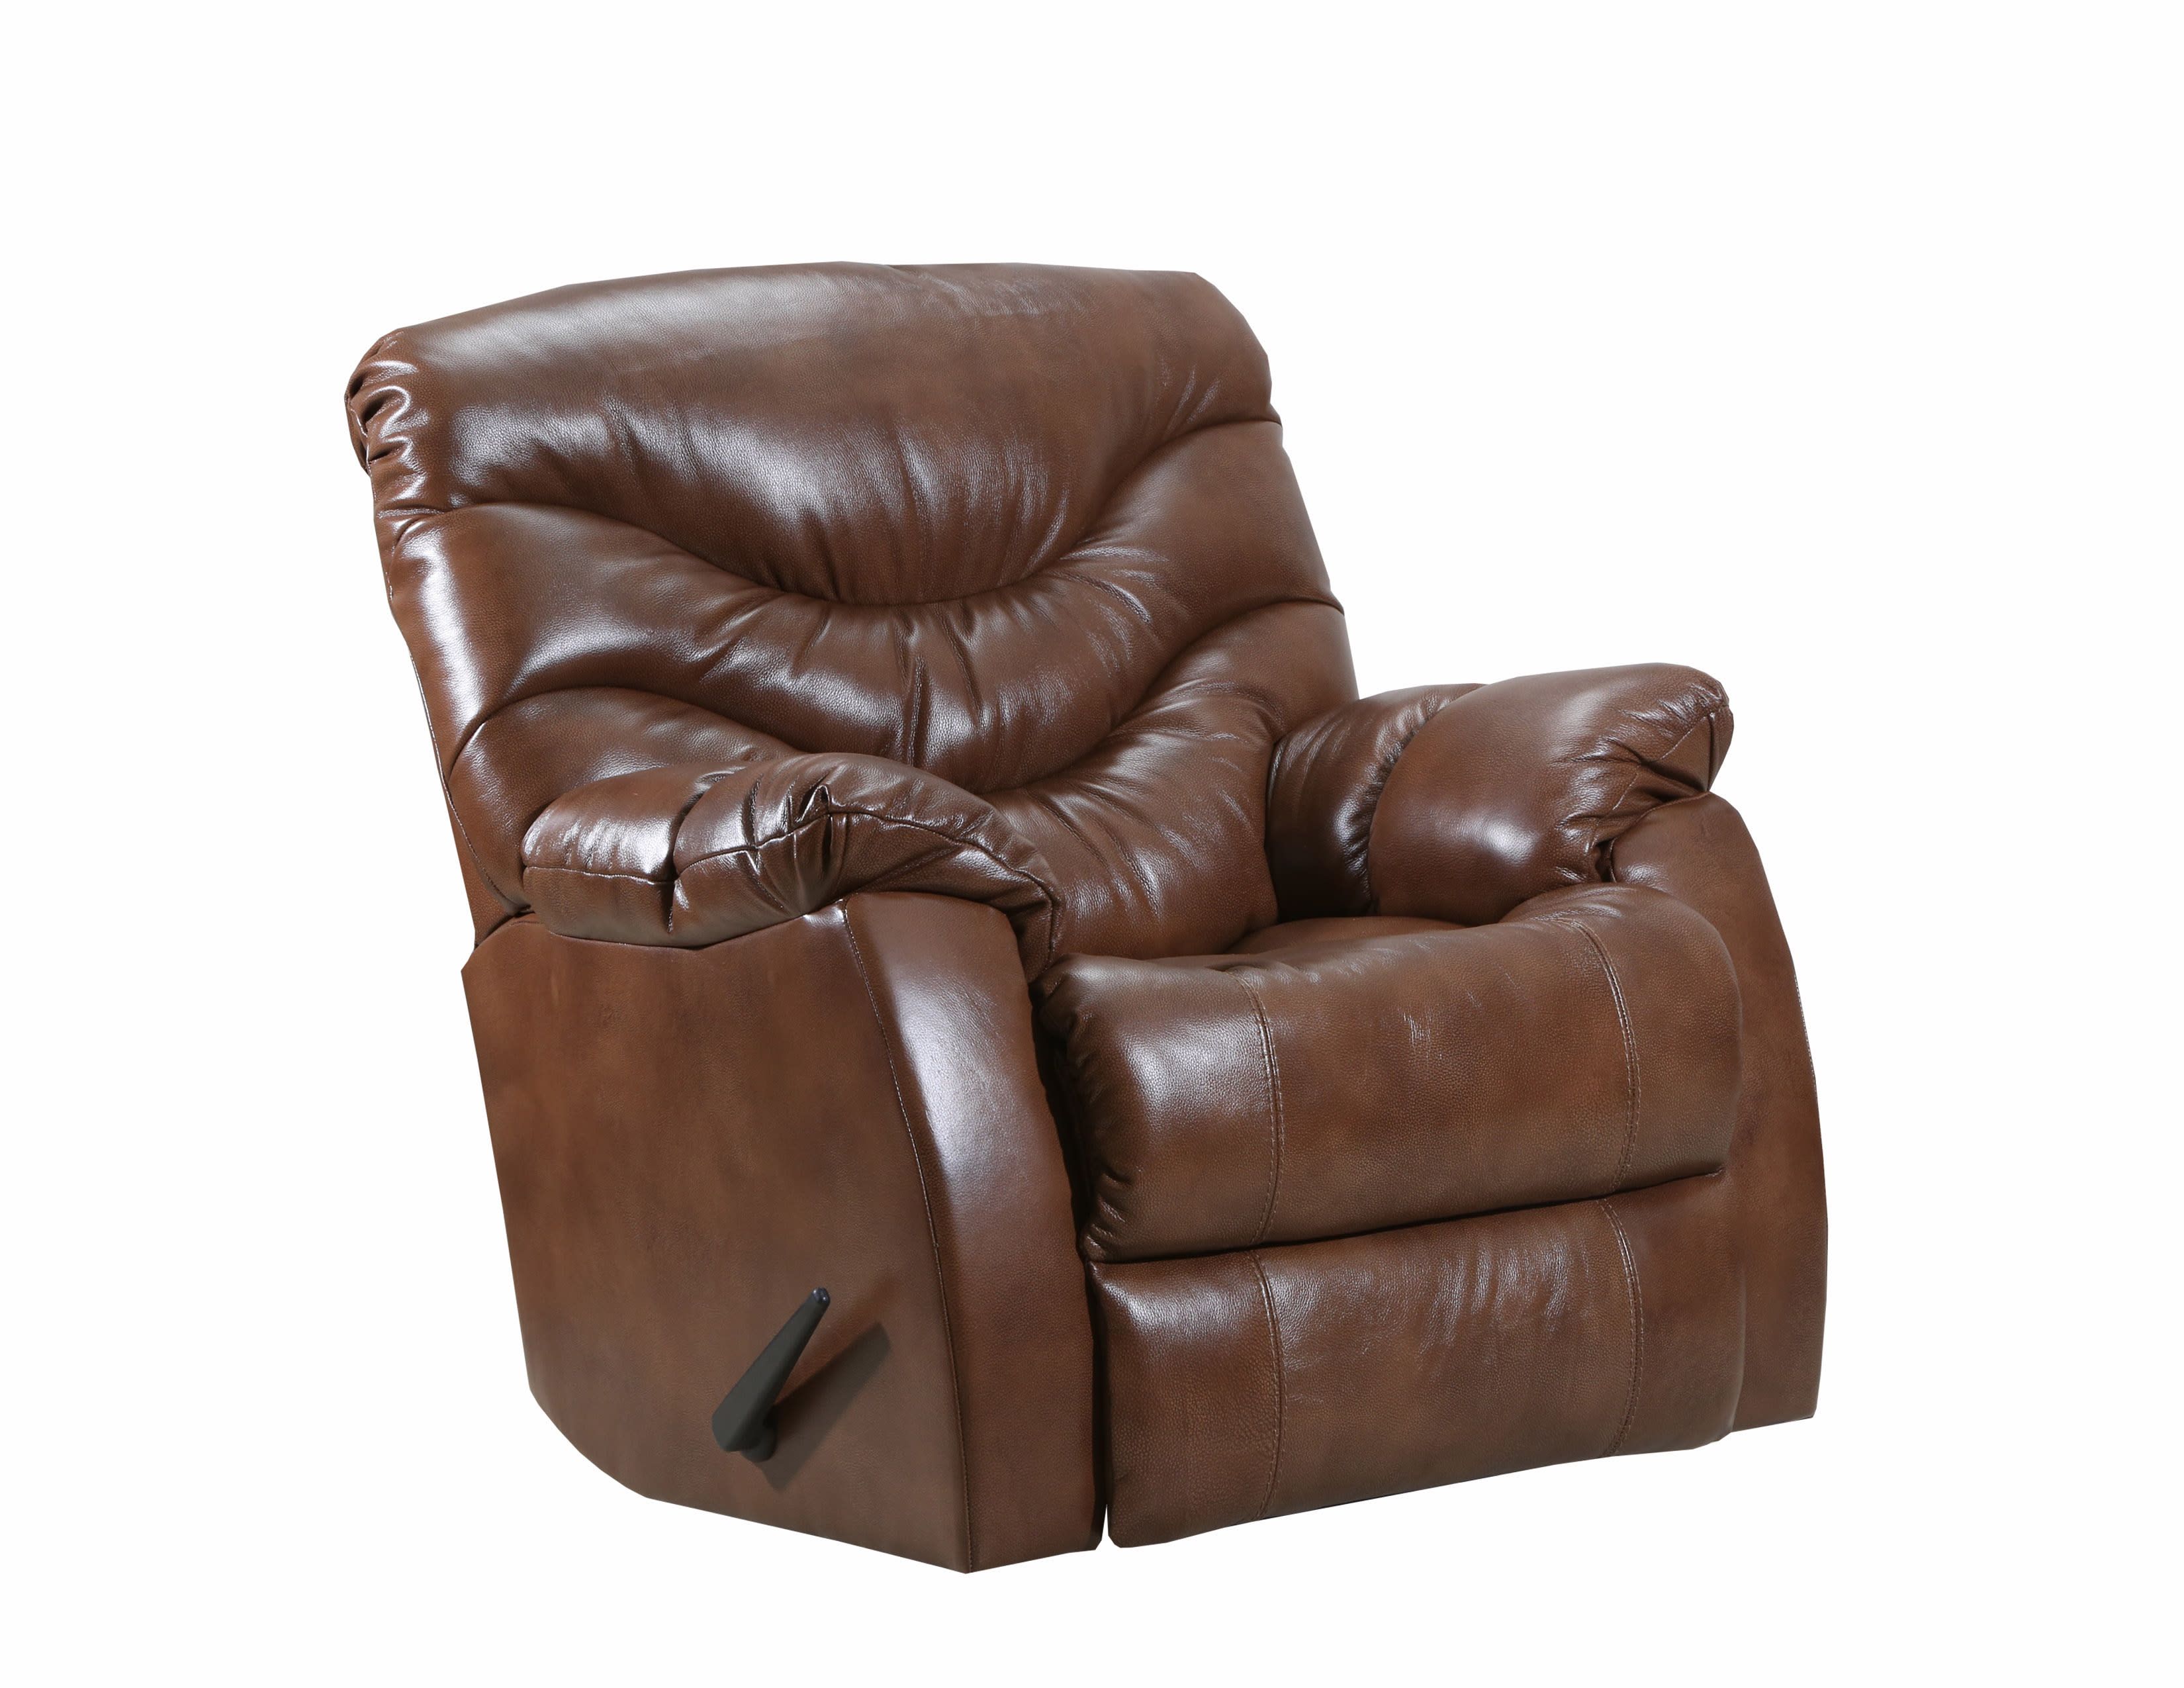 Lane Furniture Yellowstone Tobacco Swivel Rocker Recliner & Reviews For Swivel Tobacco Leather Chairs (View 10 of 20)